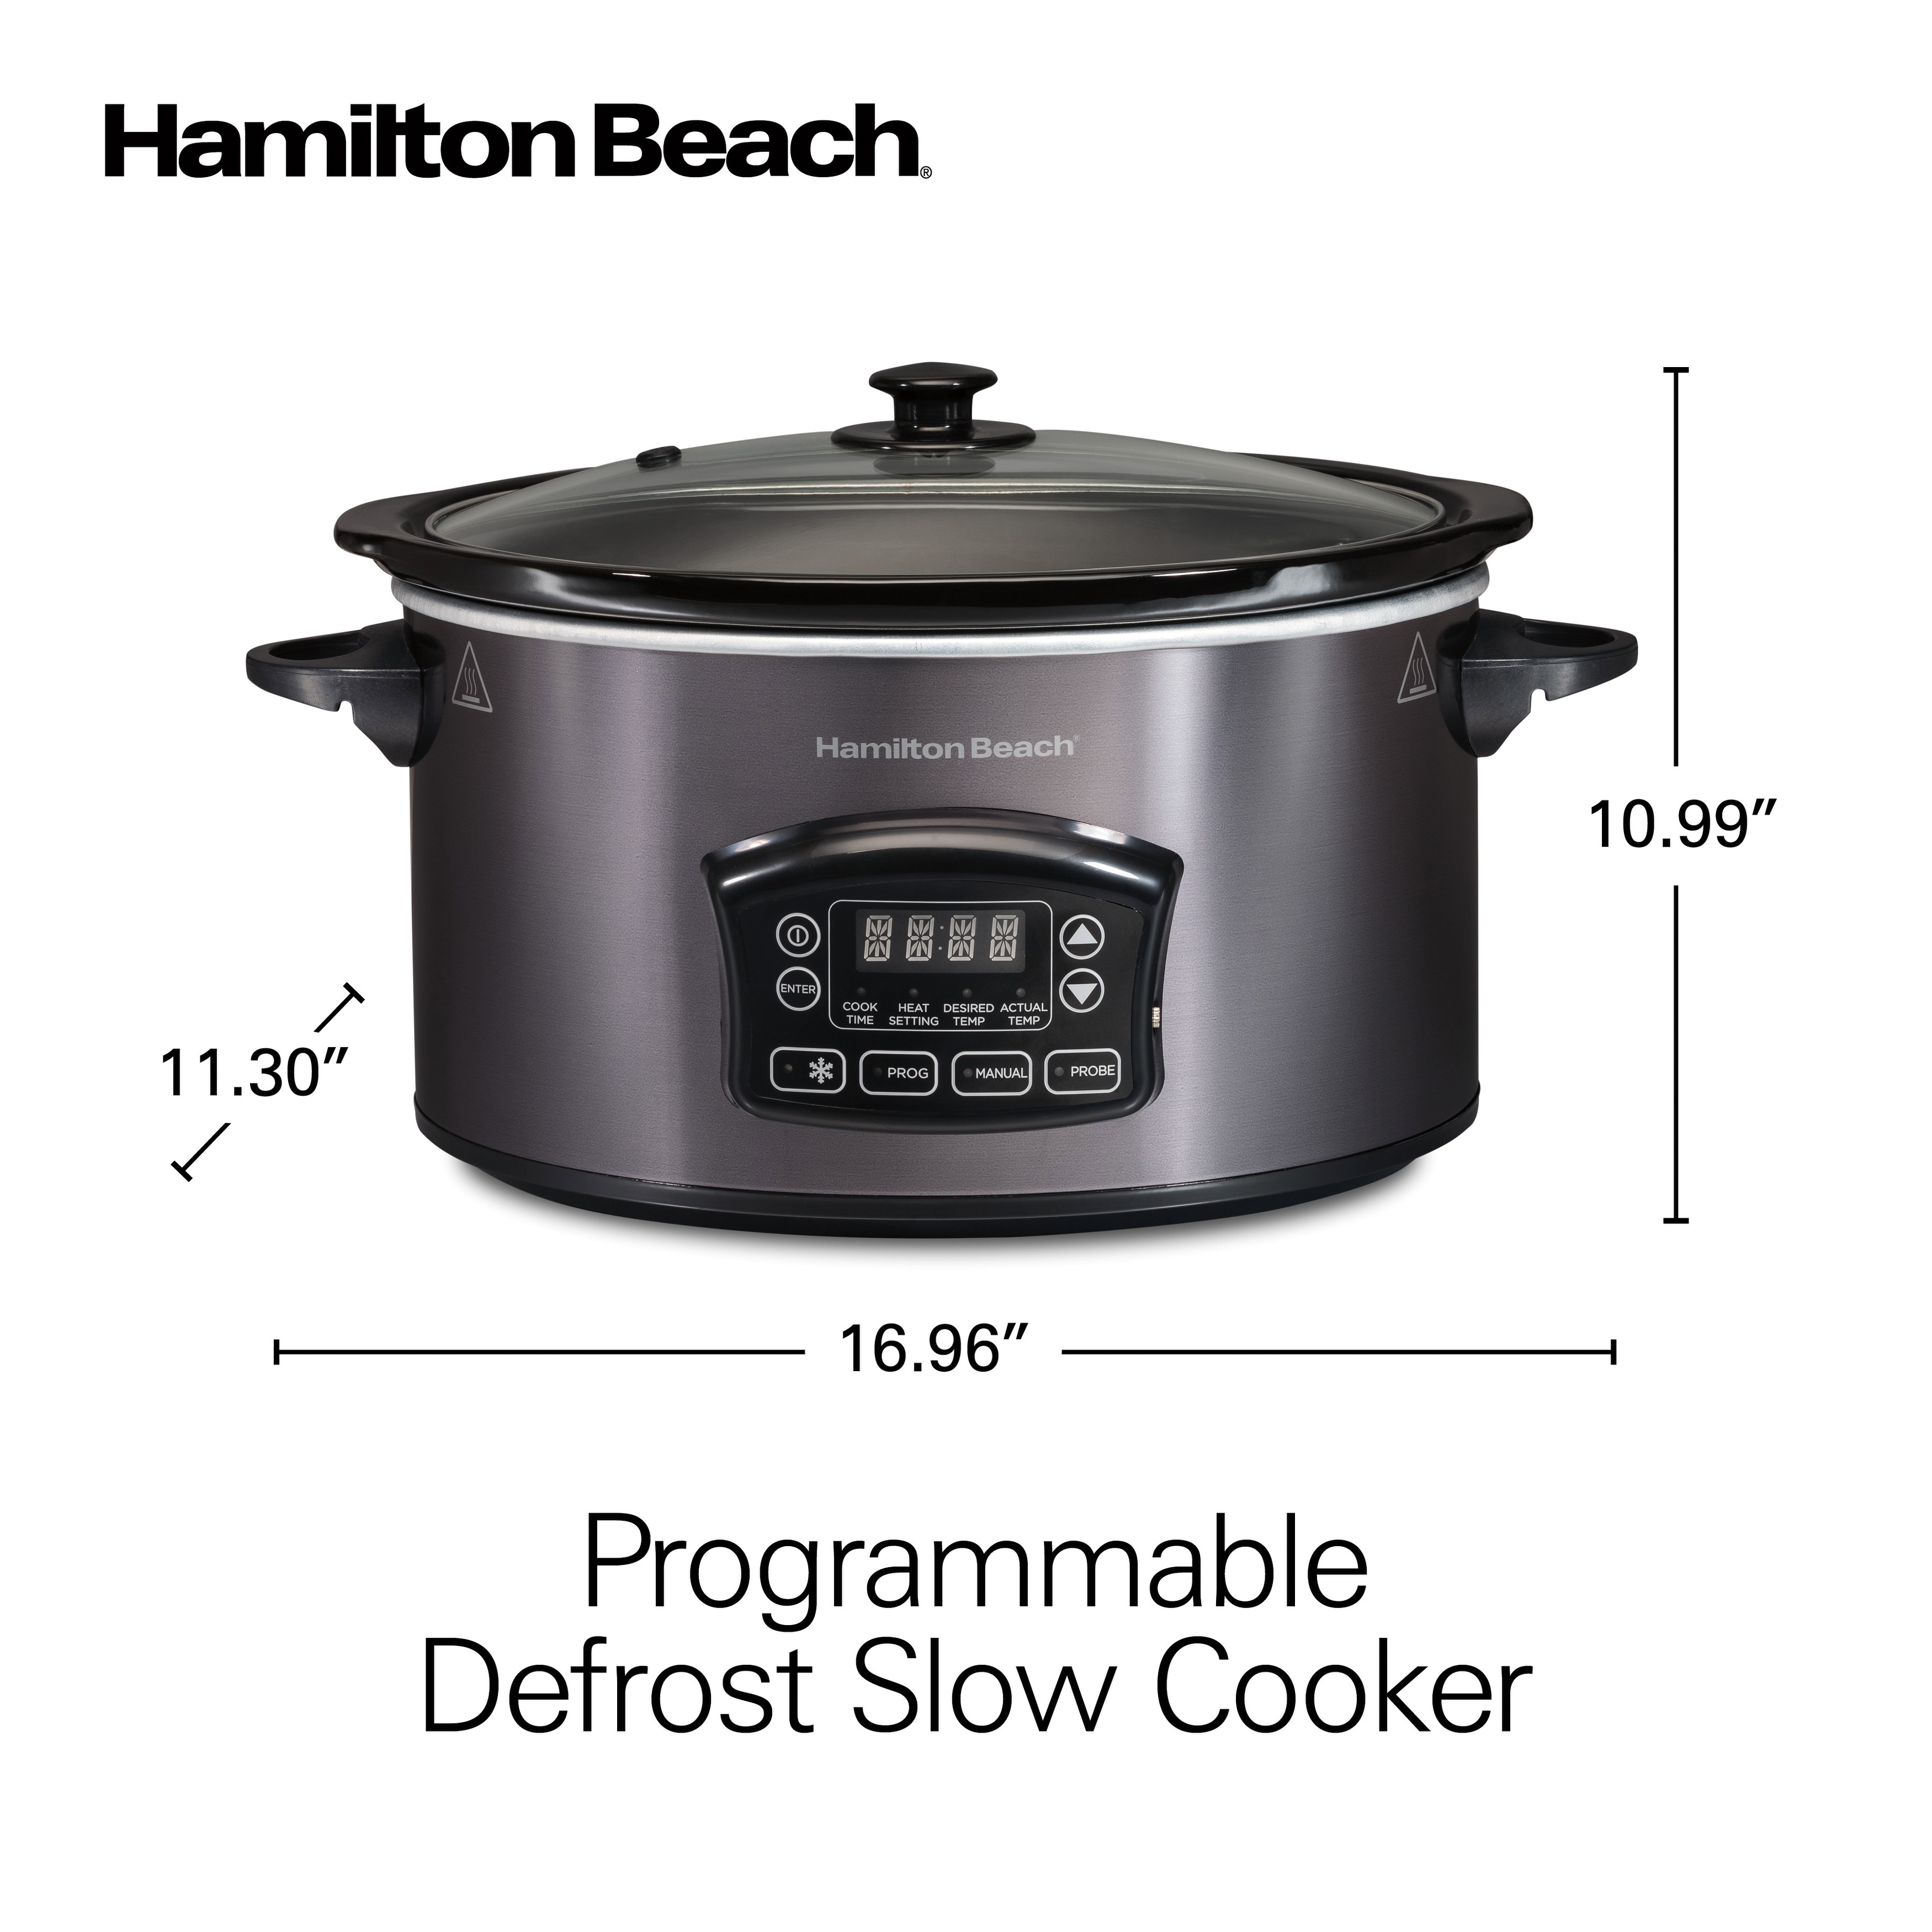 https://ak1.ostkcdn.com/images/products/is/images/direct/31cabc1a5b57893e8def144b70bd9a22834c2935/Hamilton-Beach-6-Quart-Programmable-Defrost-Slow-Cooker-with-Temperature-Probe.jpg